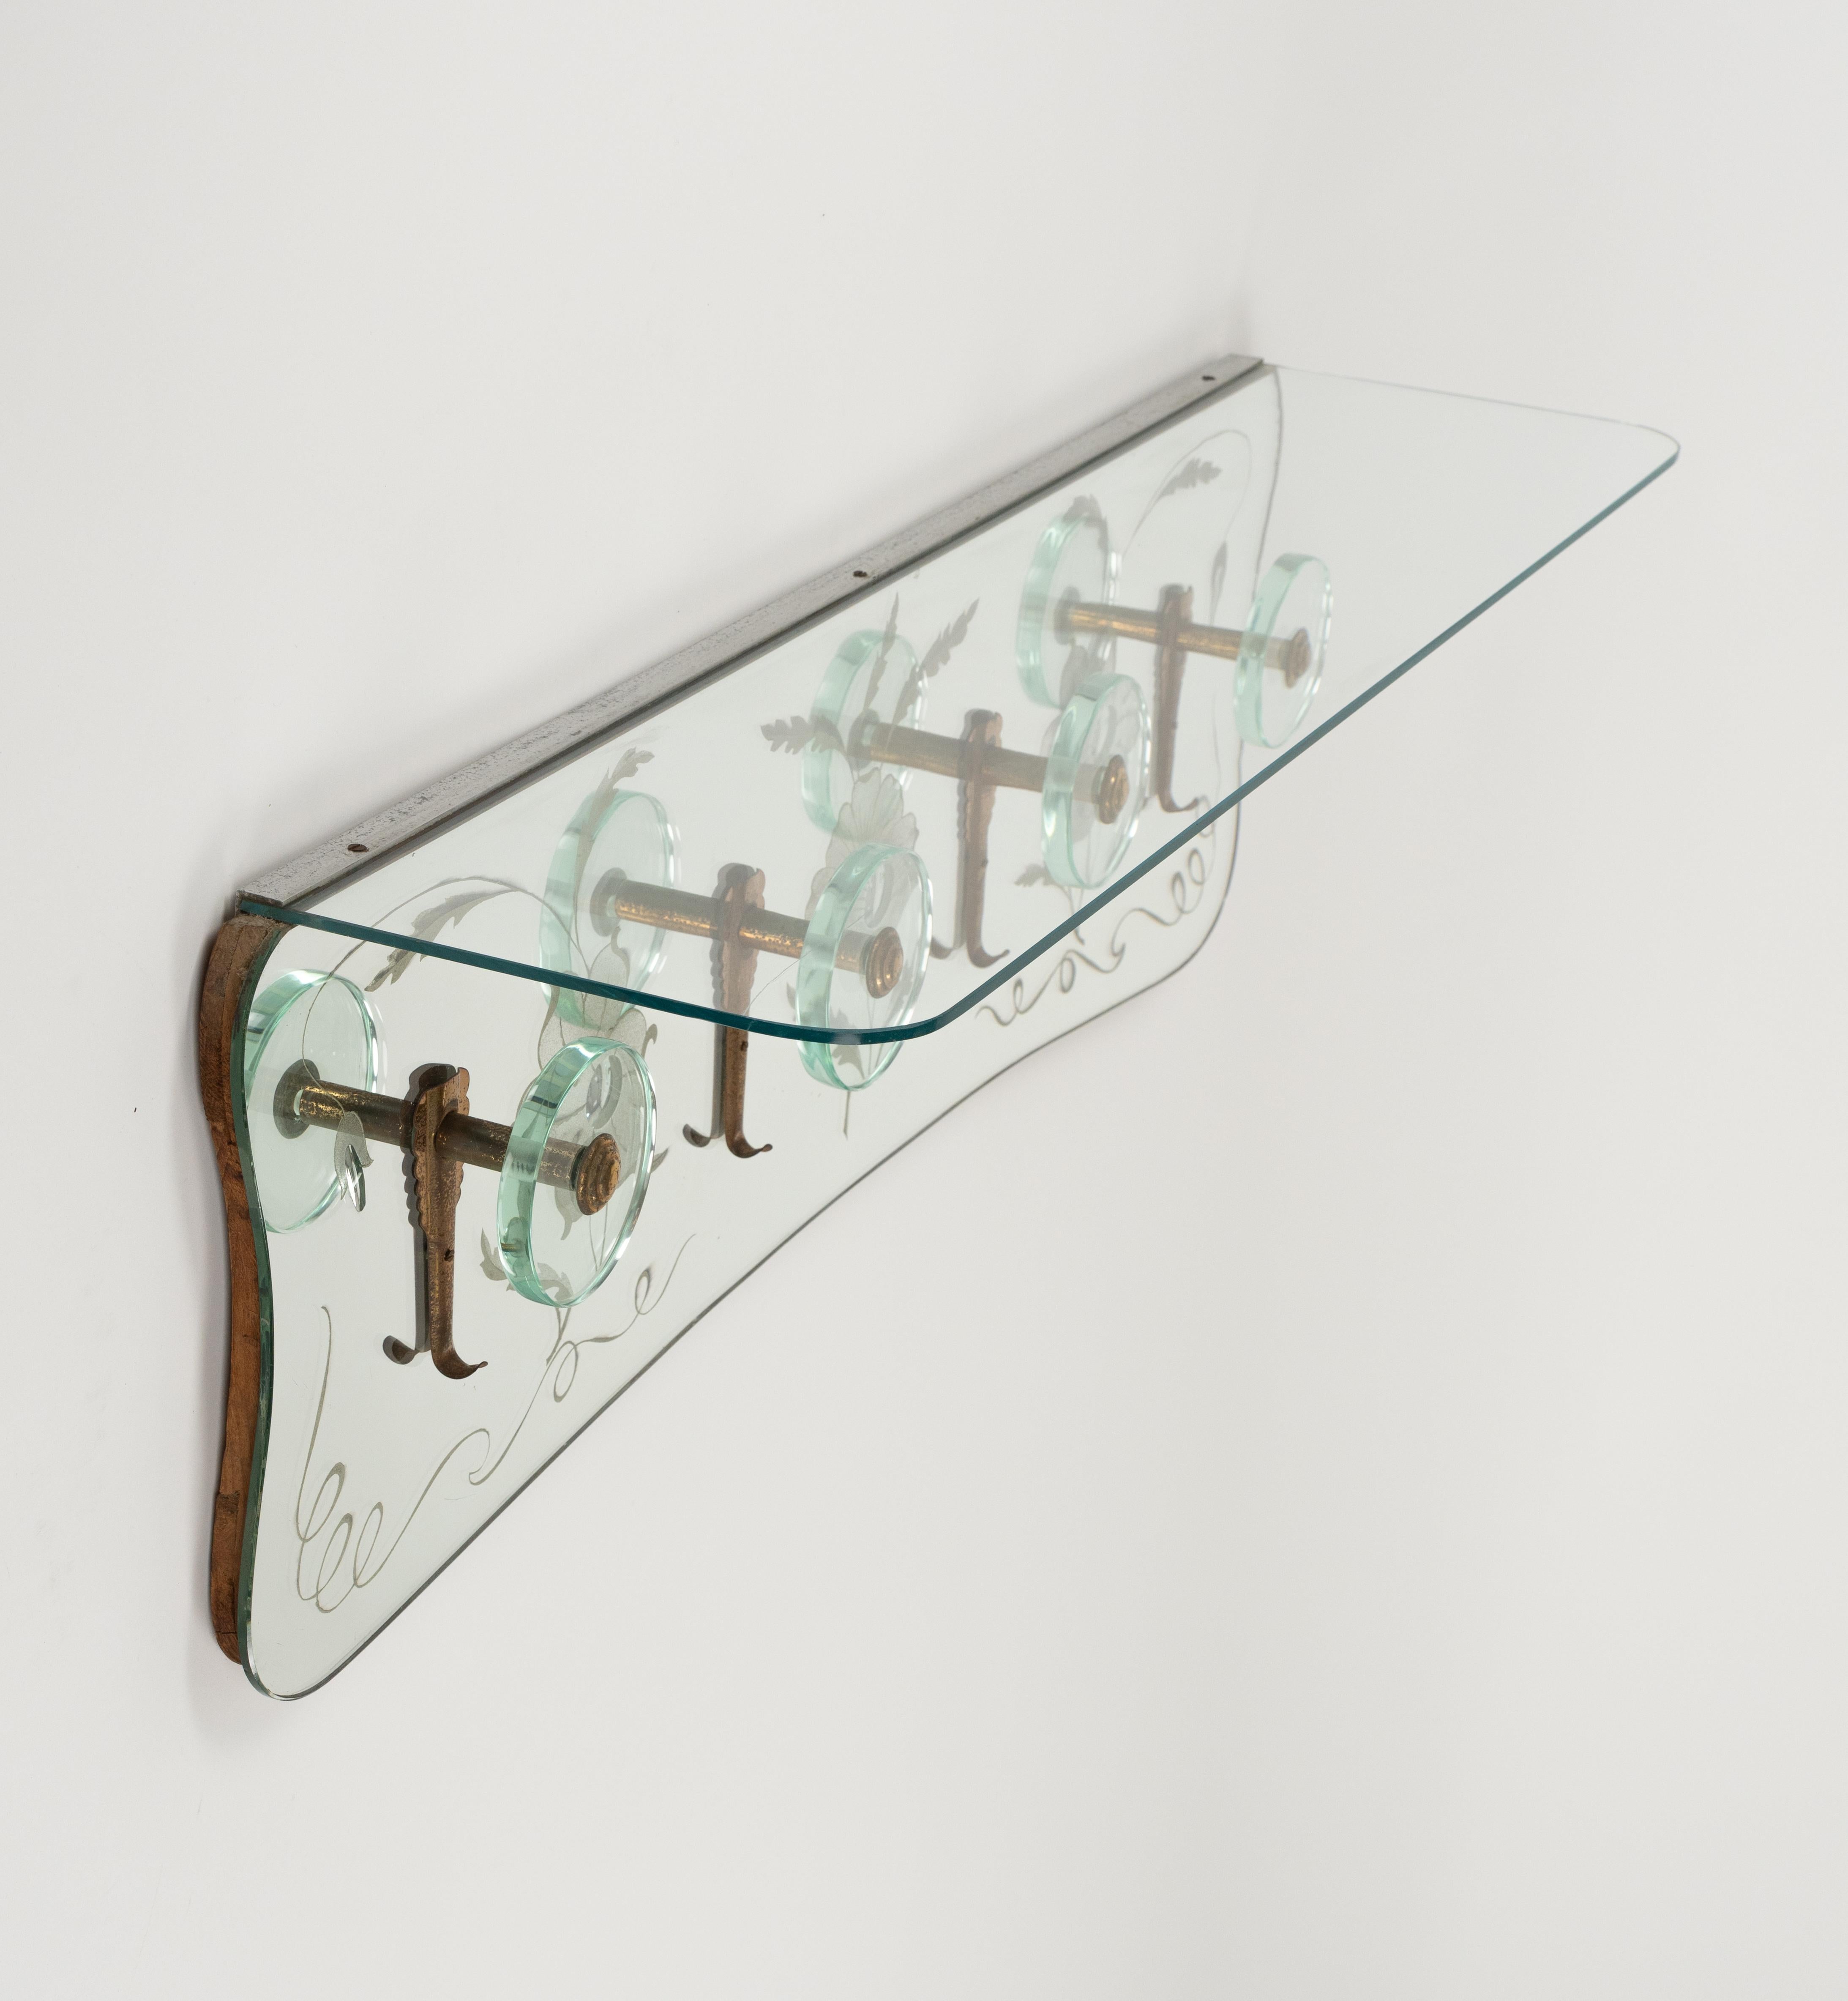 Midcentury Coat Rack Shelf in Mirror, Brass & Glass by Cristal Art, Italy, 1950s For Sale 4